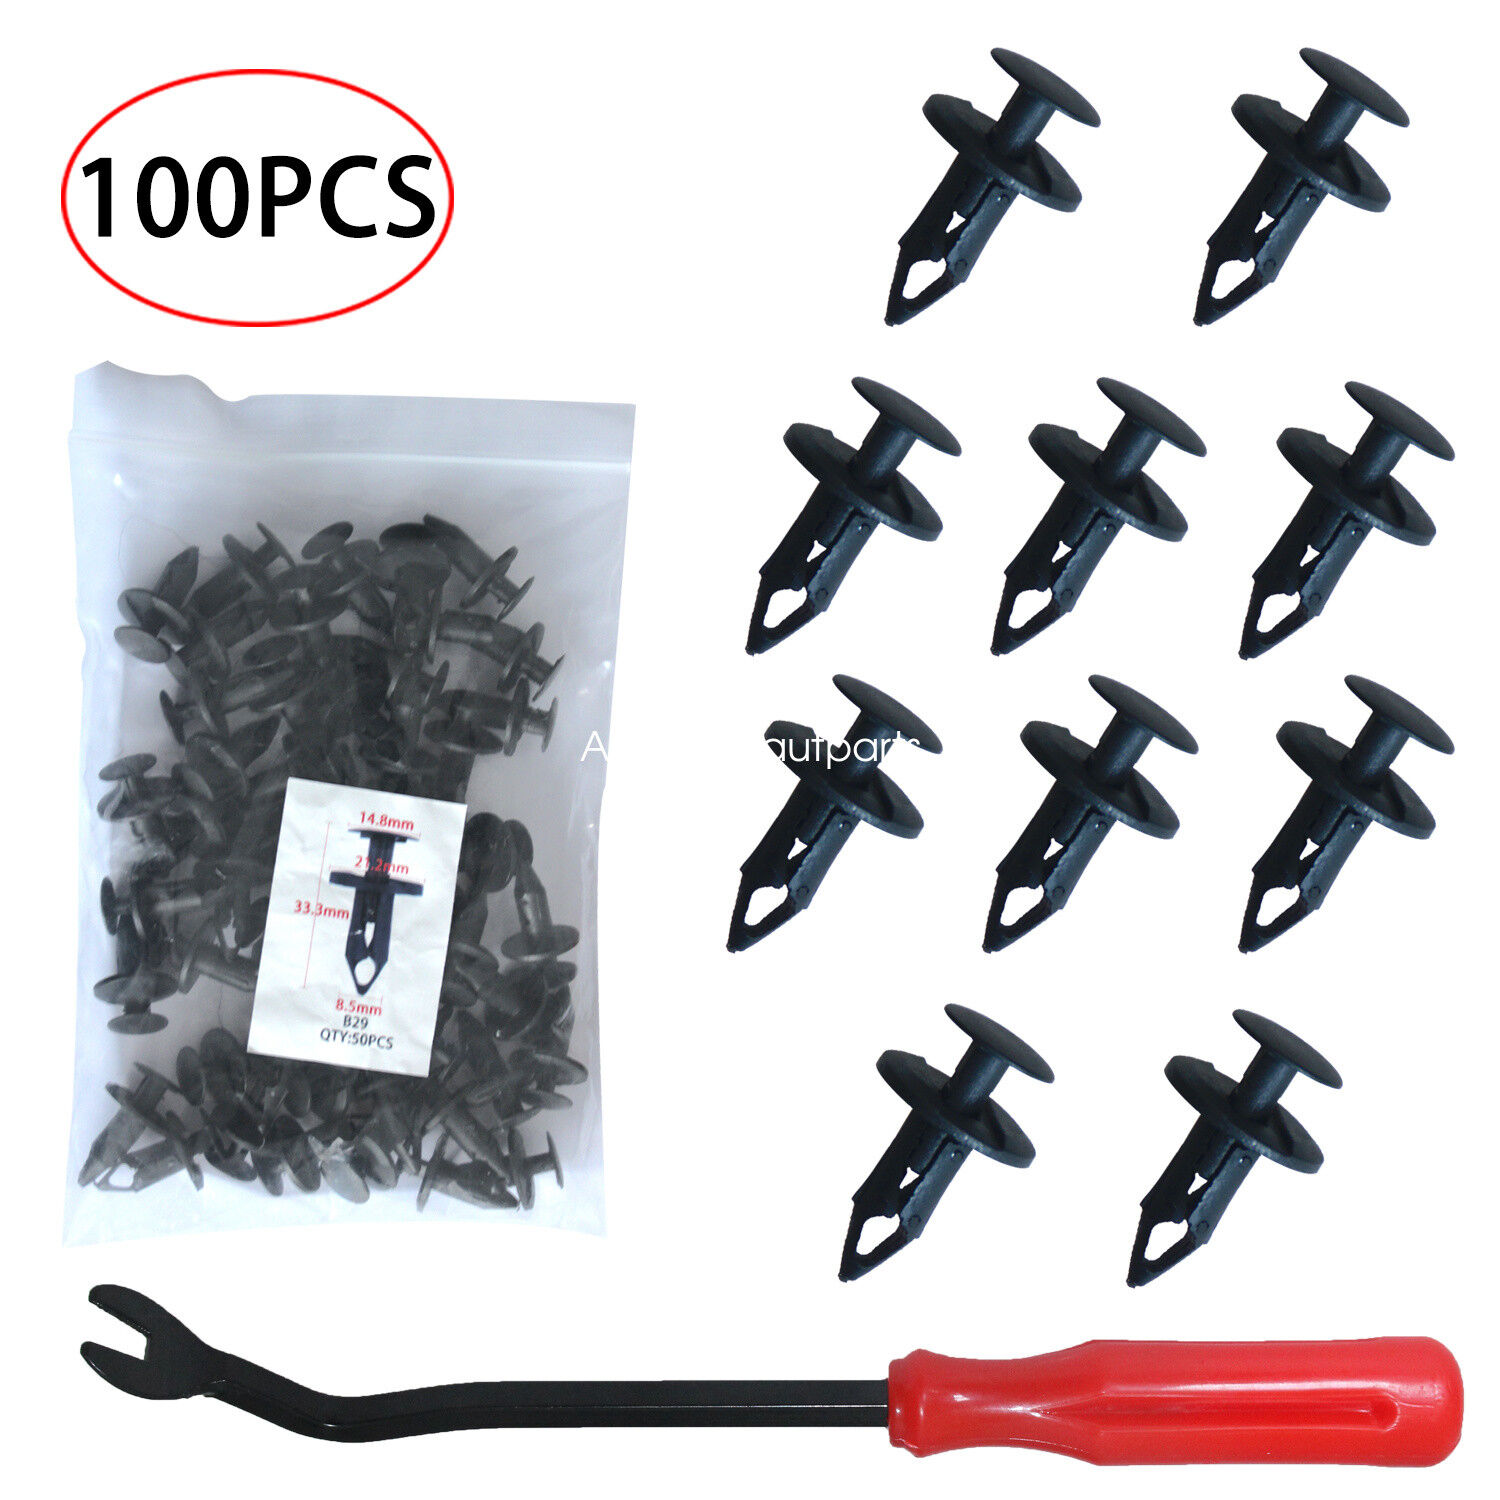 Car Fasteners Bumper Retainer Clips 100 PCS Fits Most Cars Replacement Parts